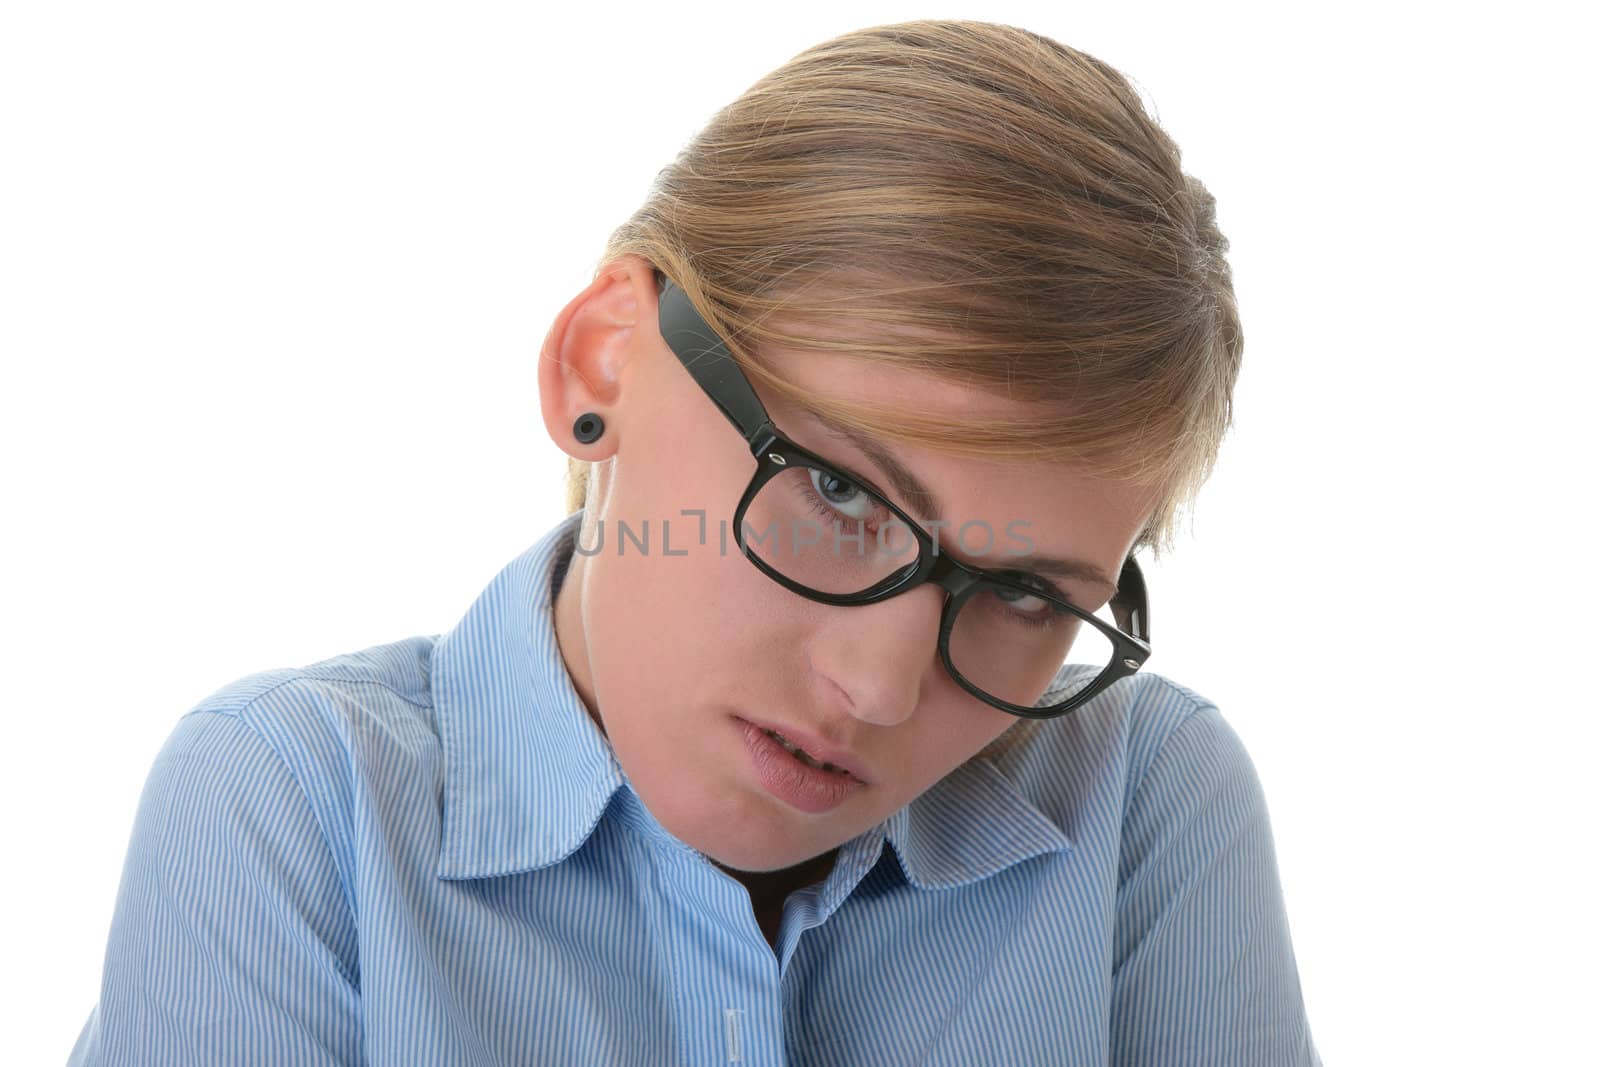 Portrait of a thoughtful young woman in blue shirt and glasses (student, secretary or businesswoman)